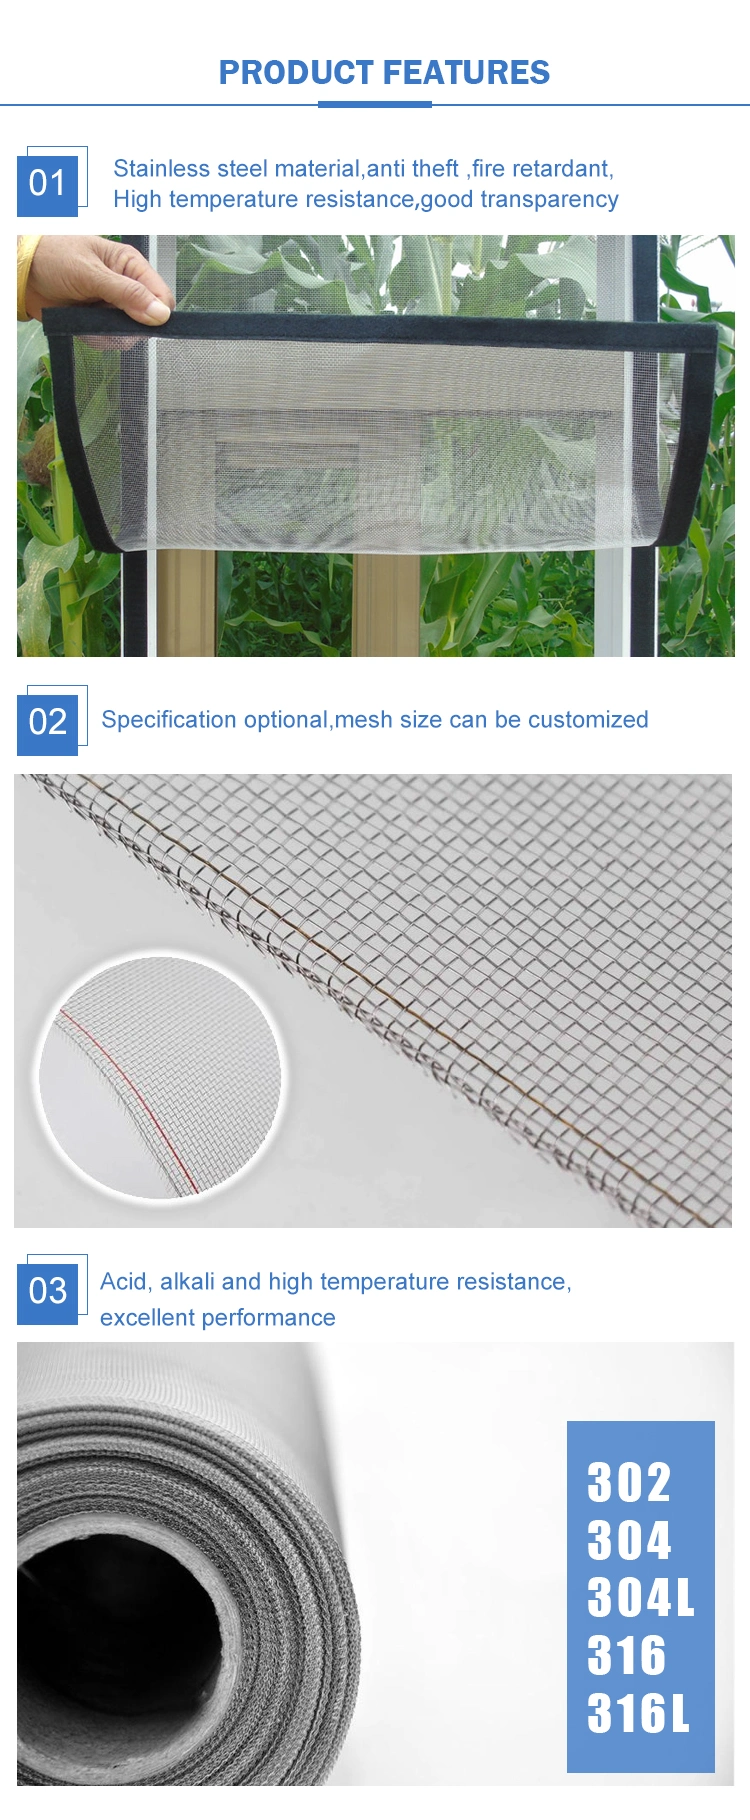 Stainless Steel Insect Screens and Security Mesh